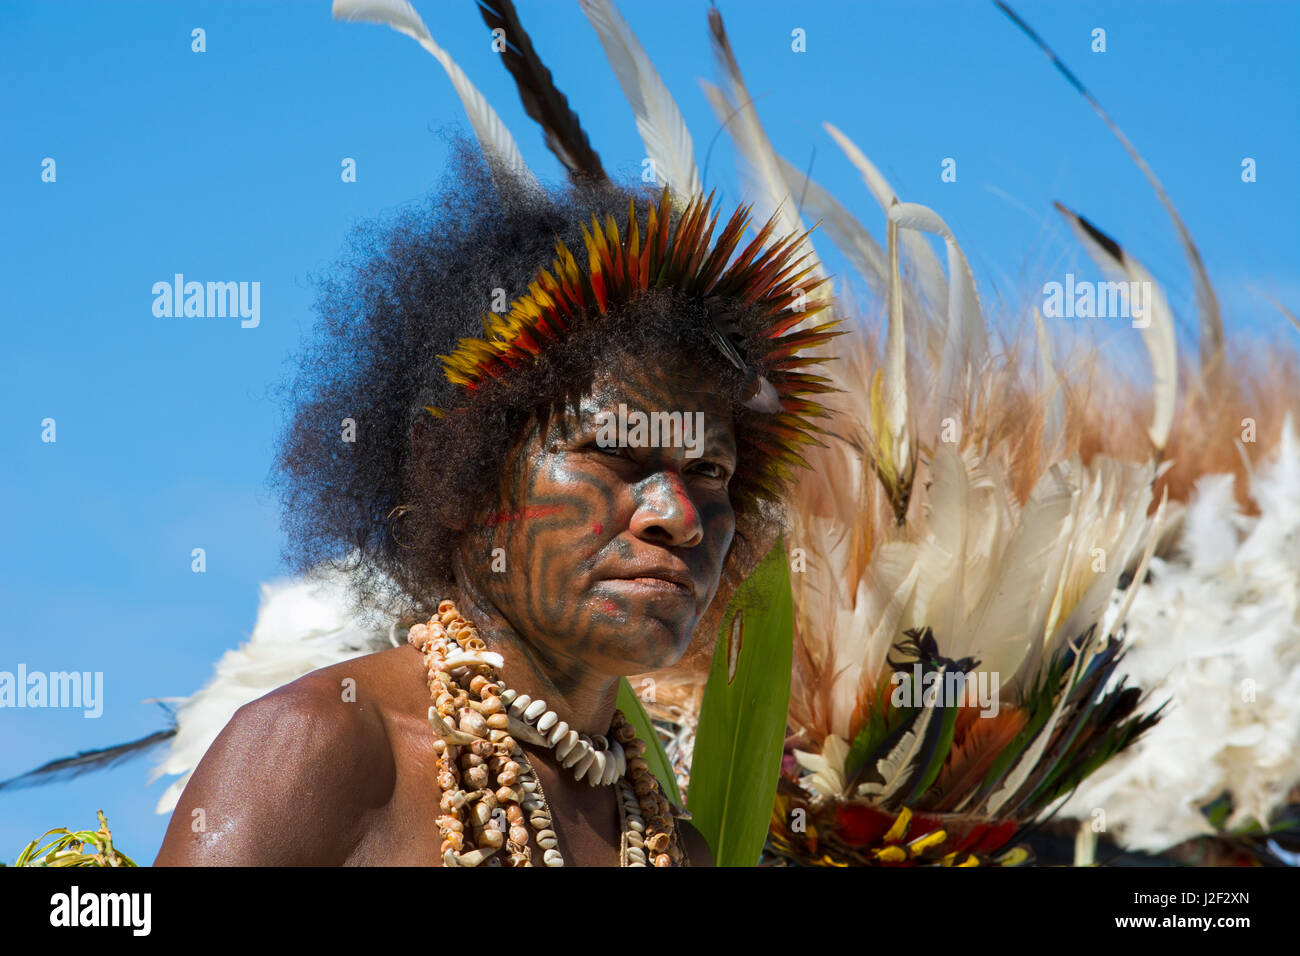 Papua New Guinea, Tufi. Traditional welcome sing-sing performance. Woman dressed in native attire with full face tattoo. Ornate tropical bird feathers and shell necklace in her elaborate costumes. Stock Photo